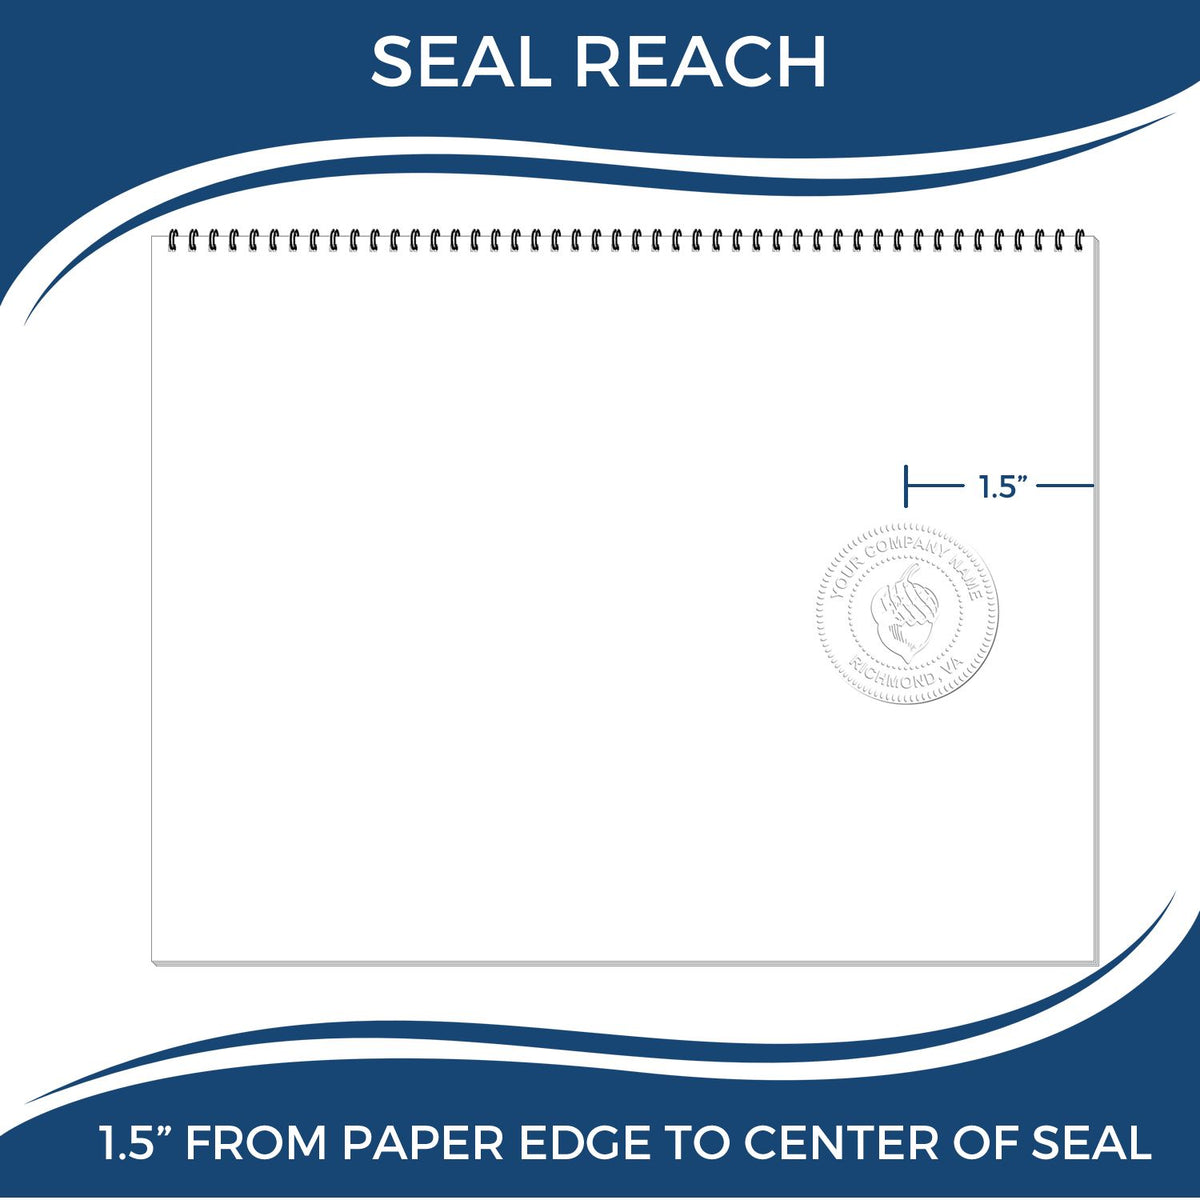 An infographic showing the seal reach which is represented by a ruler and a miniature seal image of the Gift New Jersey Architect Seal